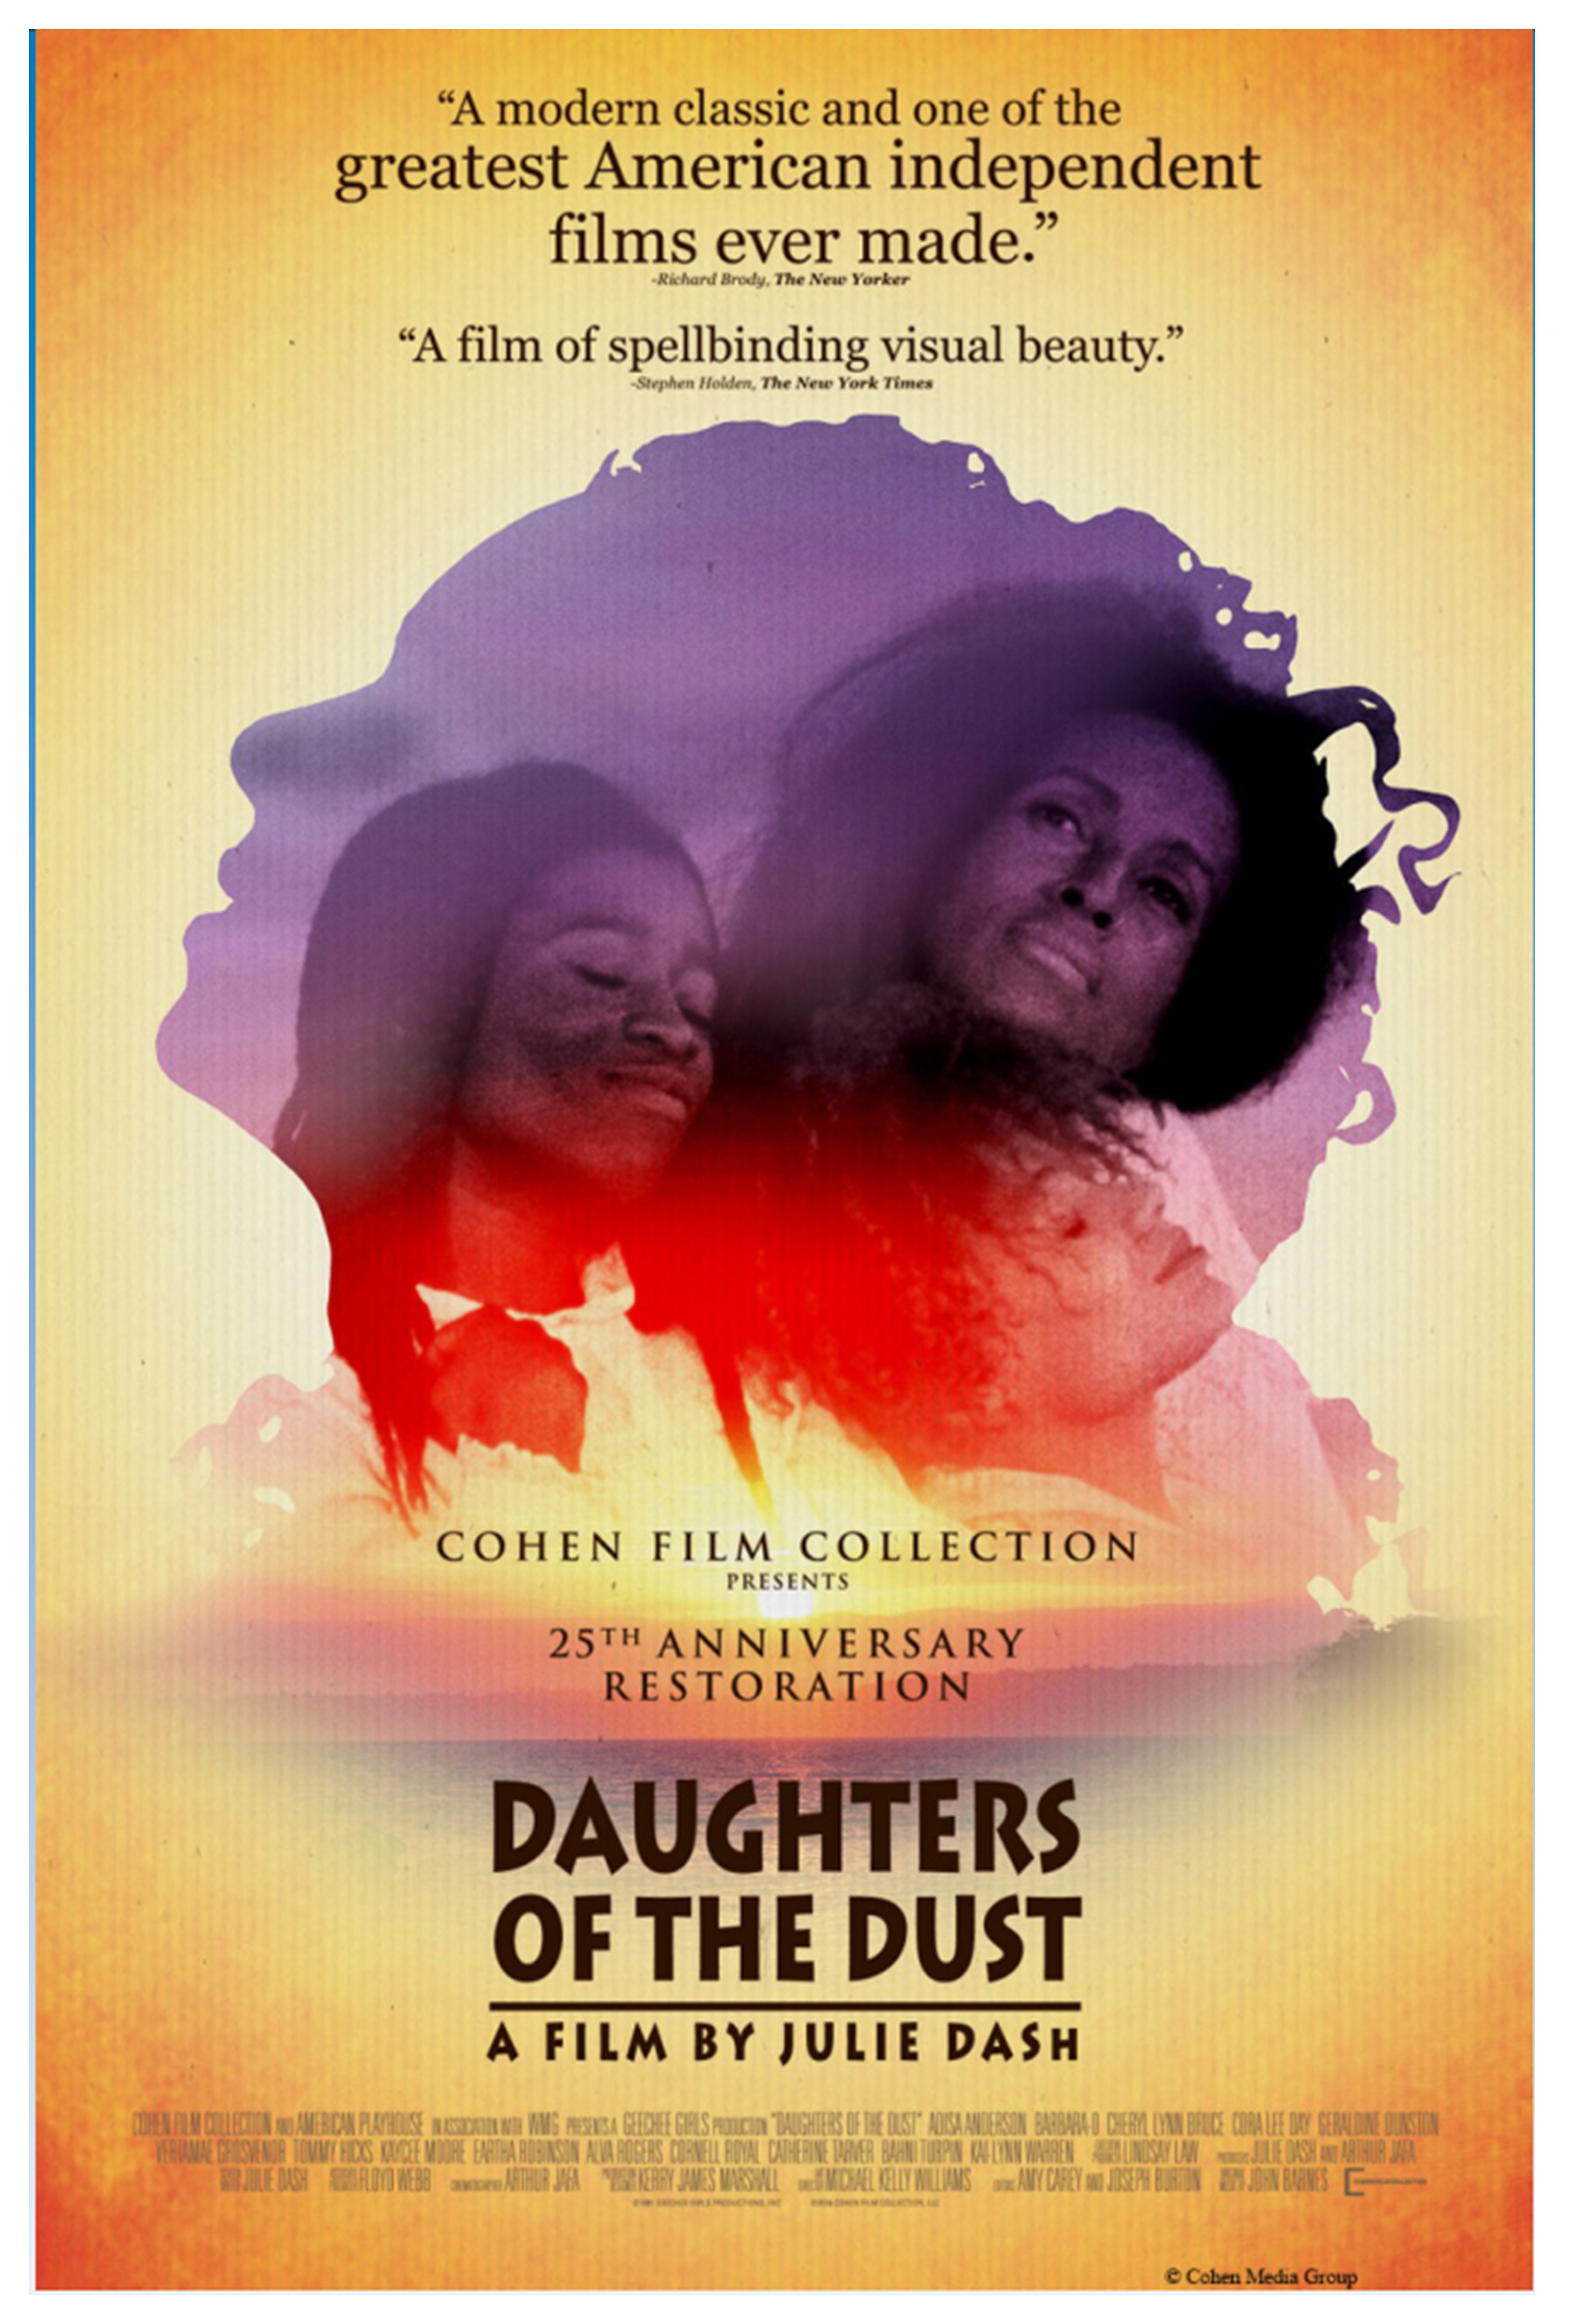 Film poster for Daughters of the Dust